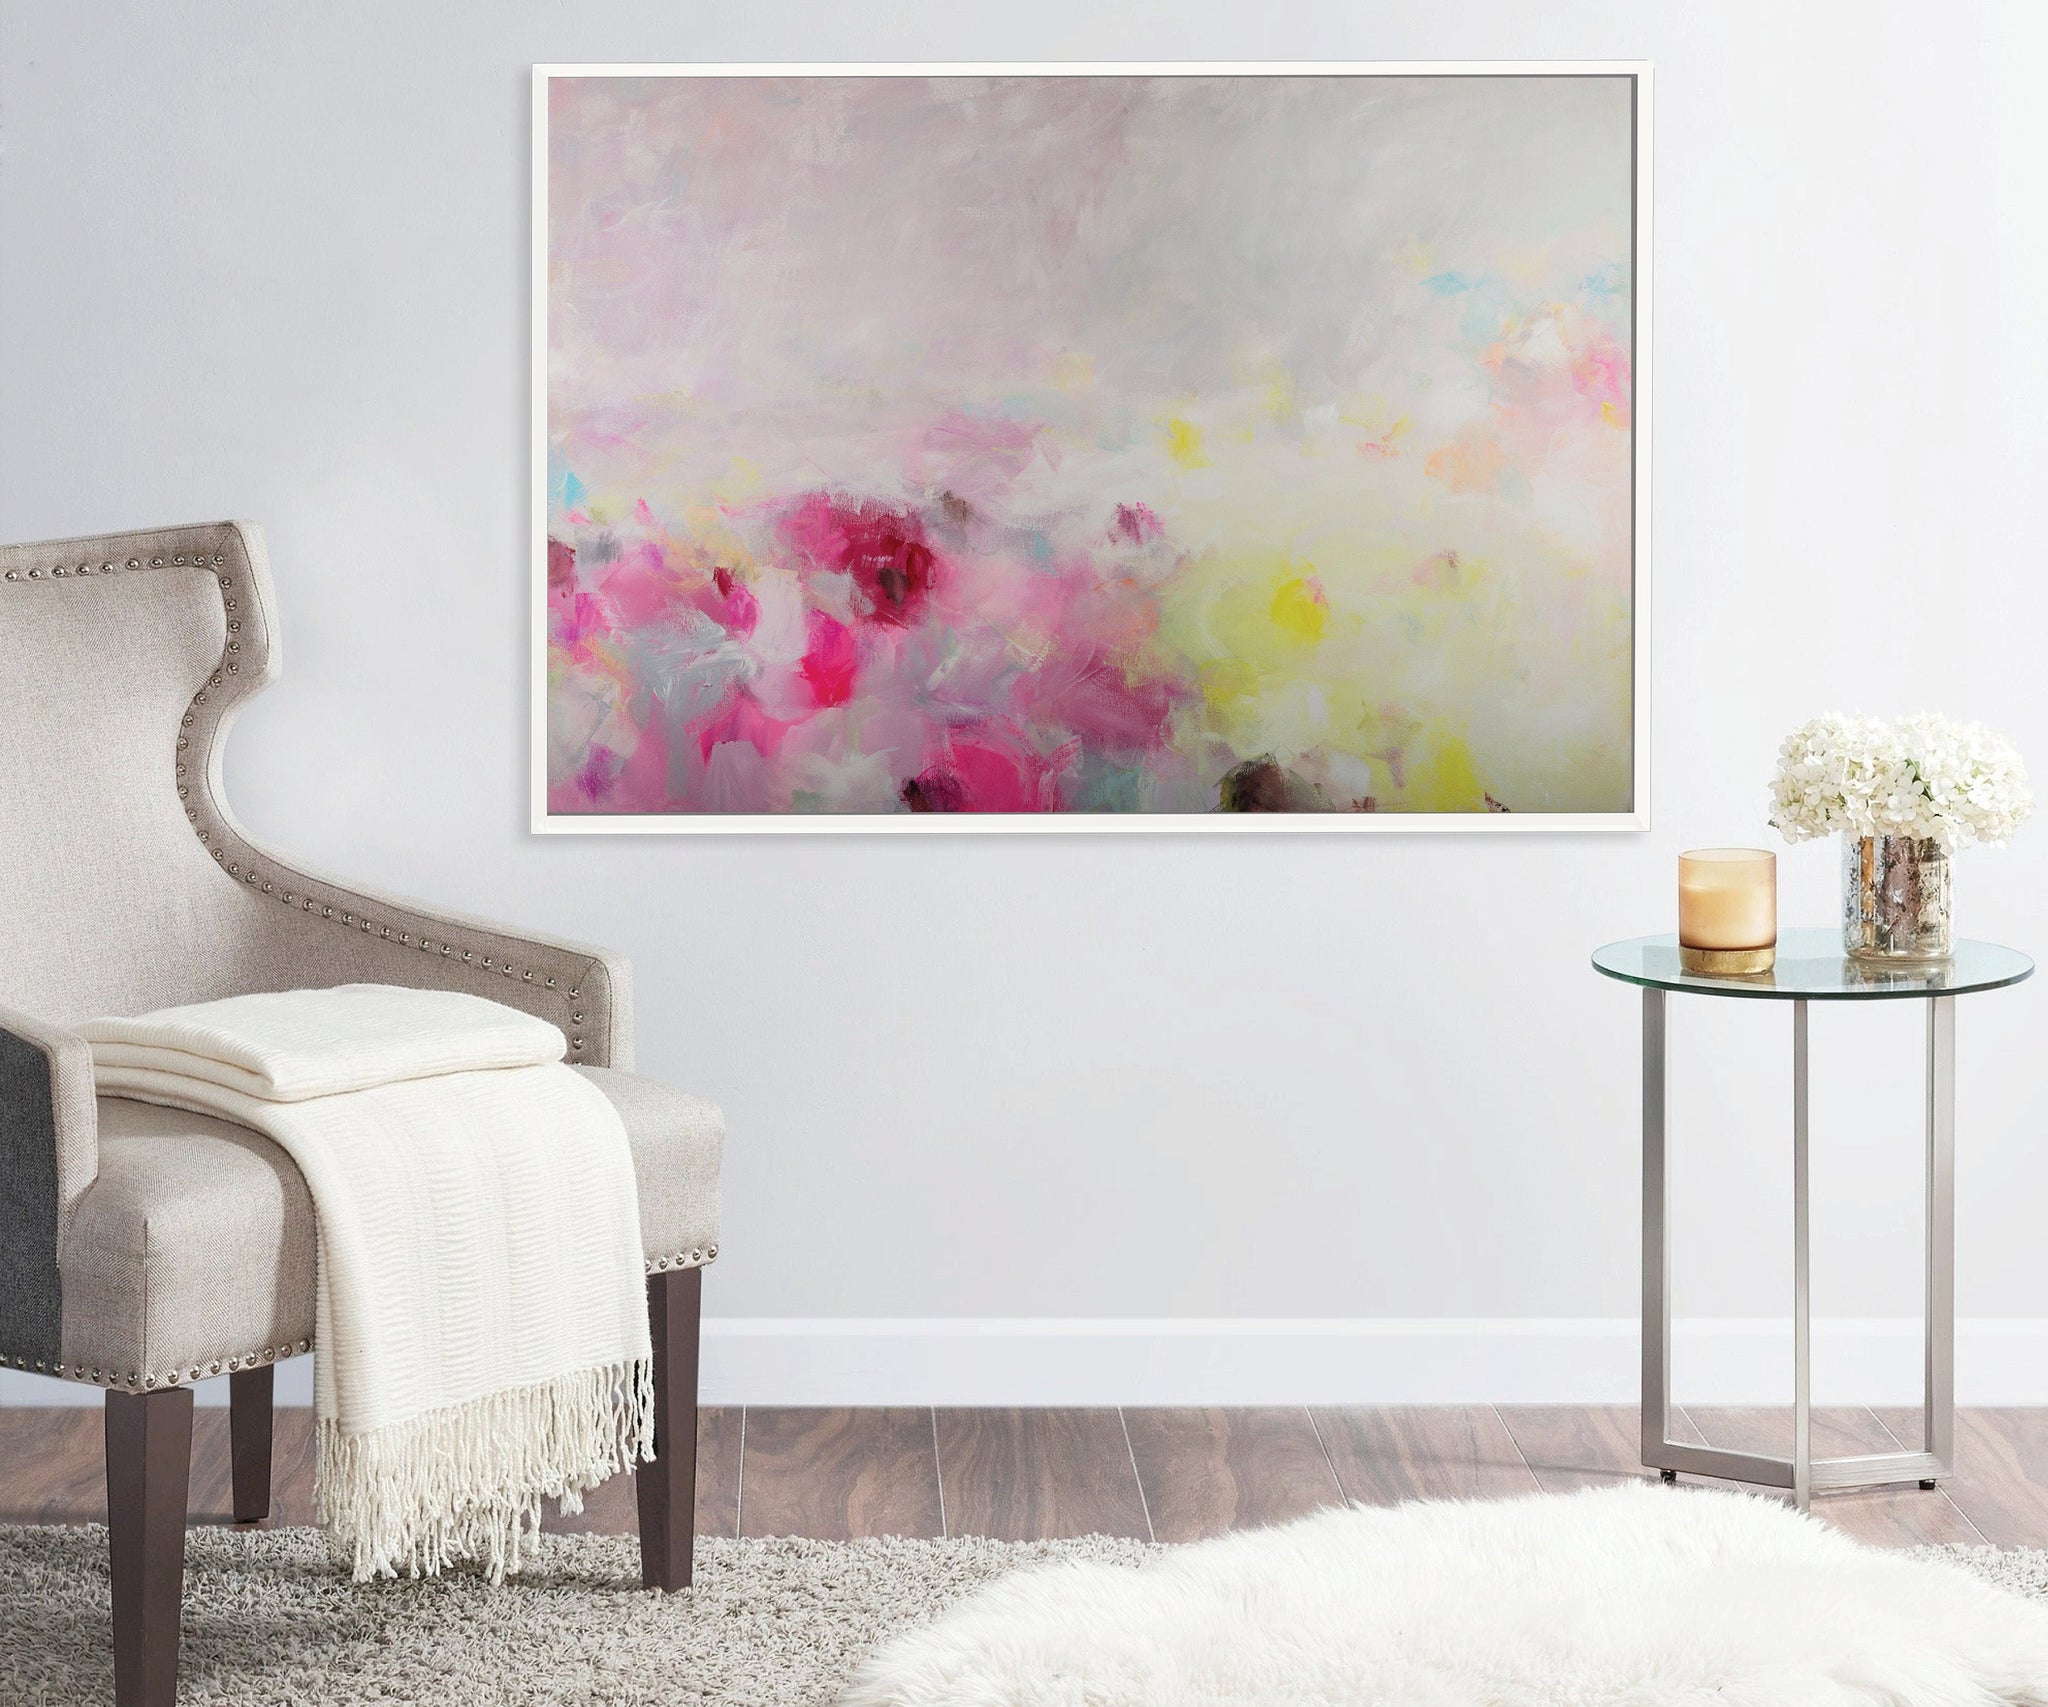 Extra large modern pink wall art, Landscape print, large abstract painting print, pink and yellow painting, acrylic abstract painting - camilomattis.com